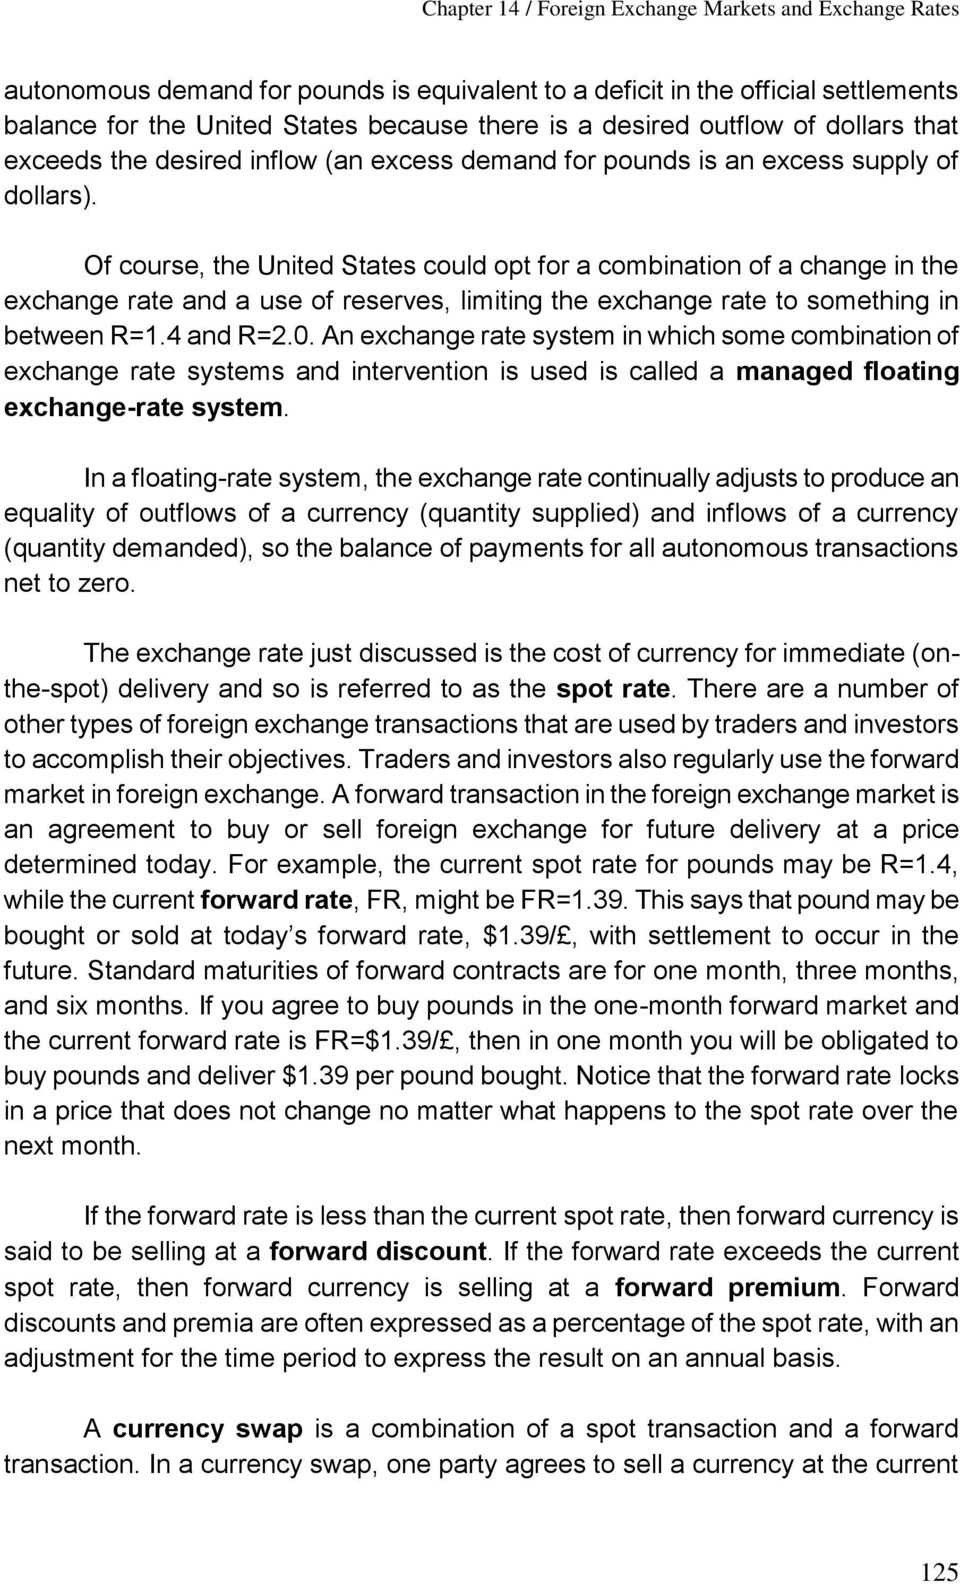 Of course, the United States could opt for a combination of a change in the exchange rate and a use of reserves, limiting the exchange rate to something in between R=1.4 and R=2.0.